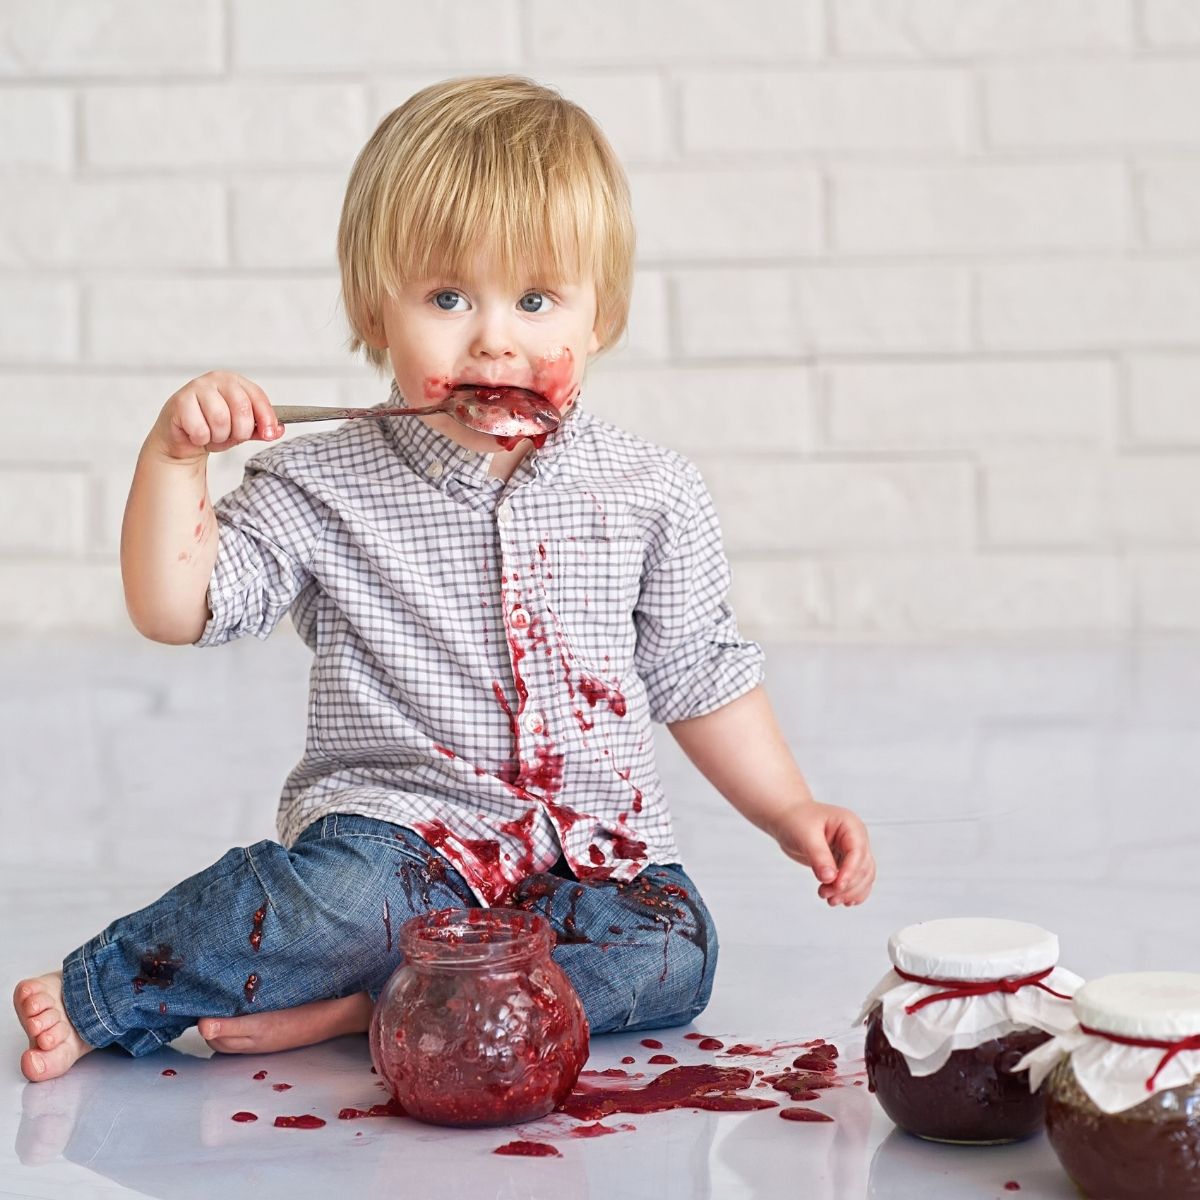 Can toddlers eat jam